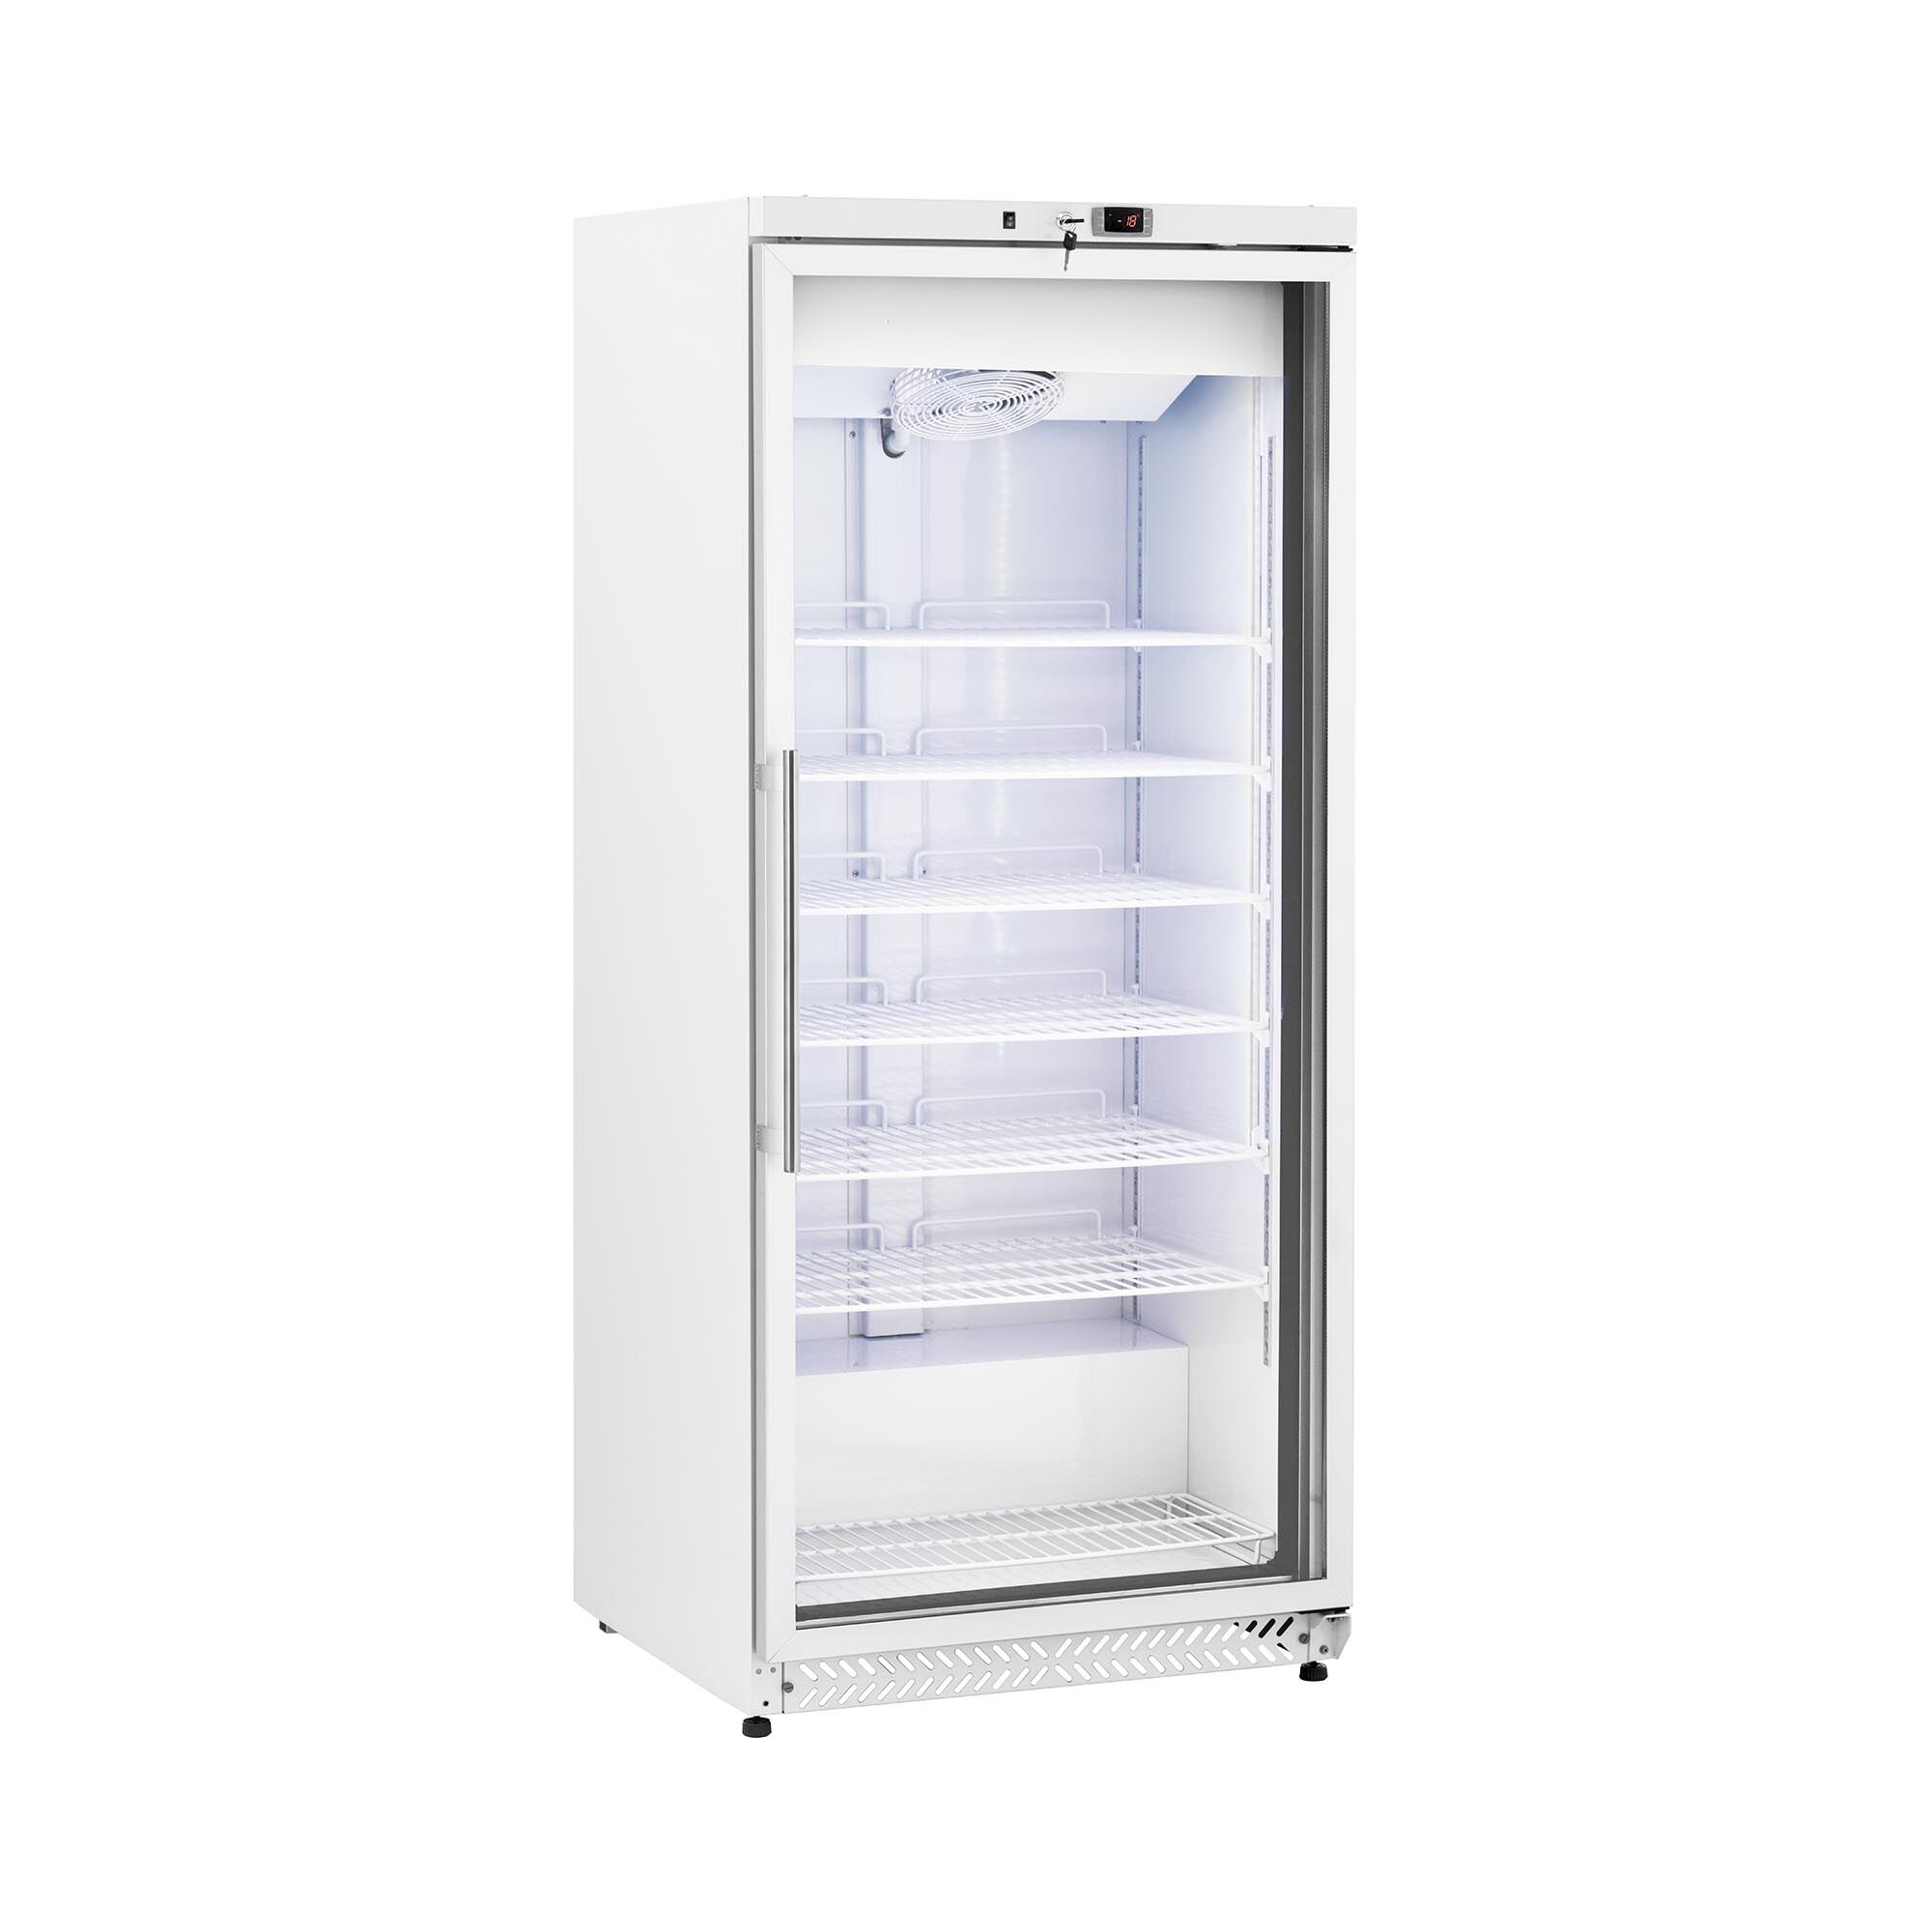 Royal Catering Freezer - 580 L - Royal Catering - glass door - Silver - refrigerant R290